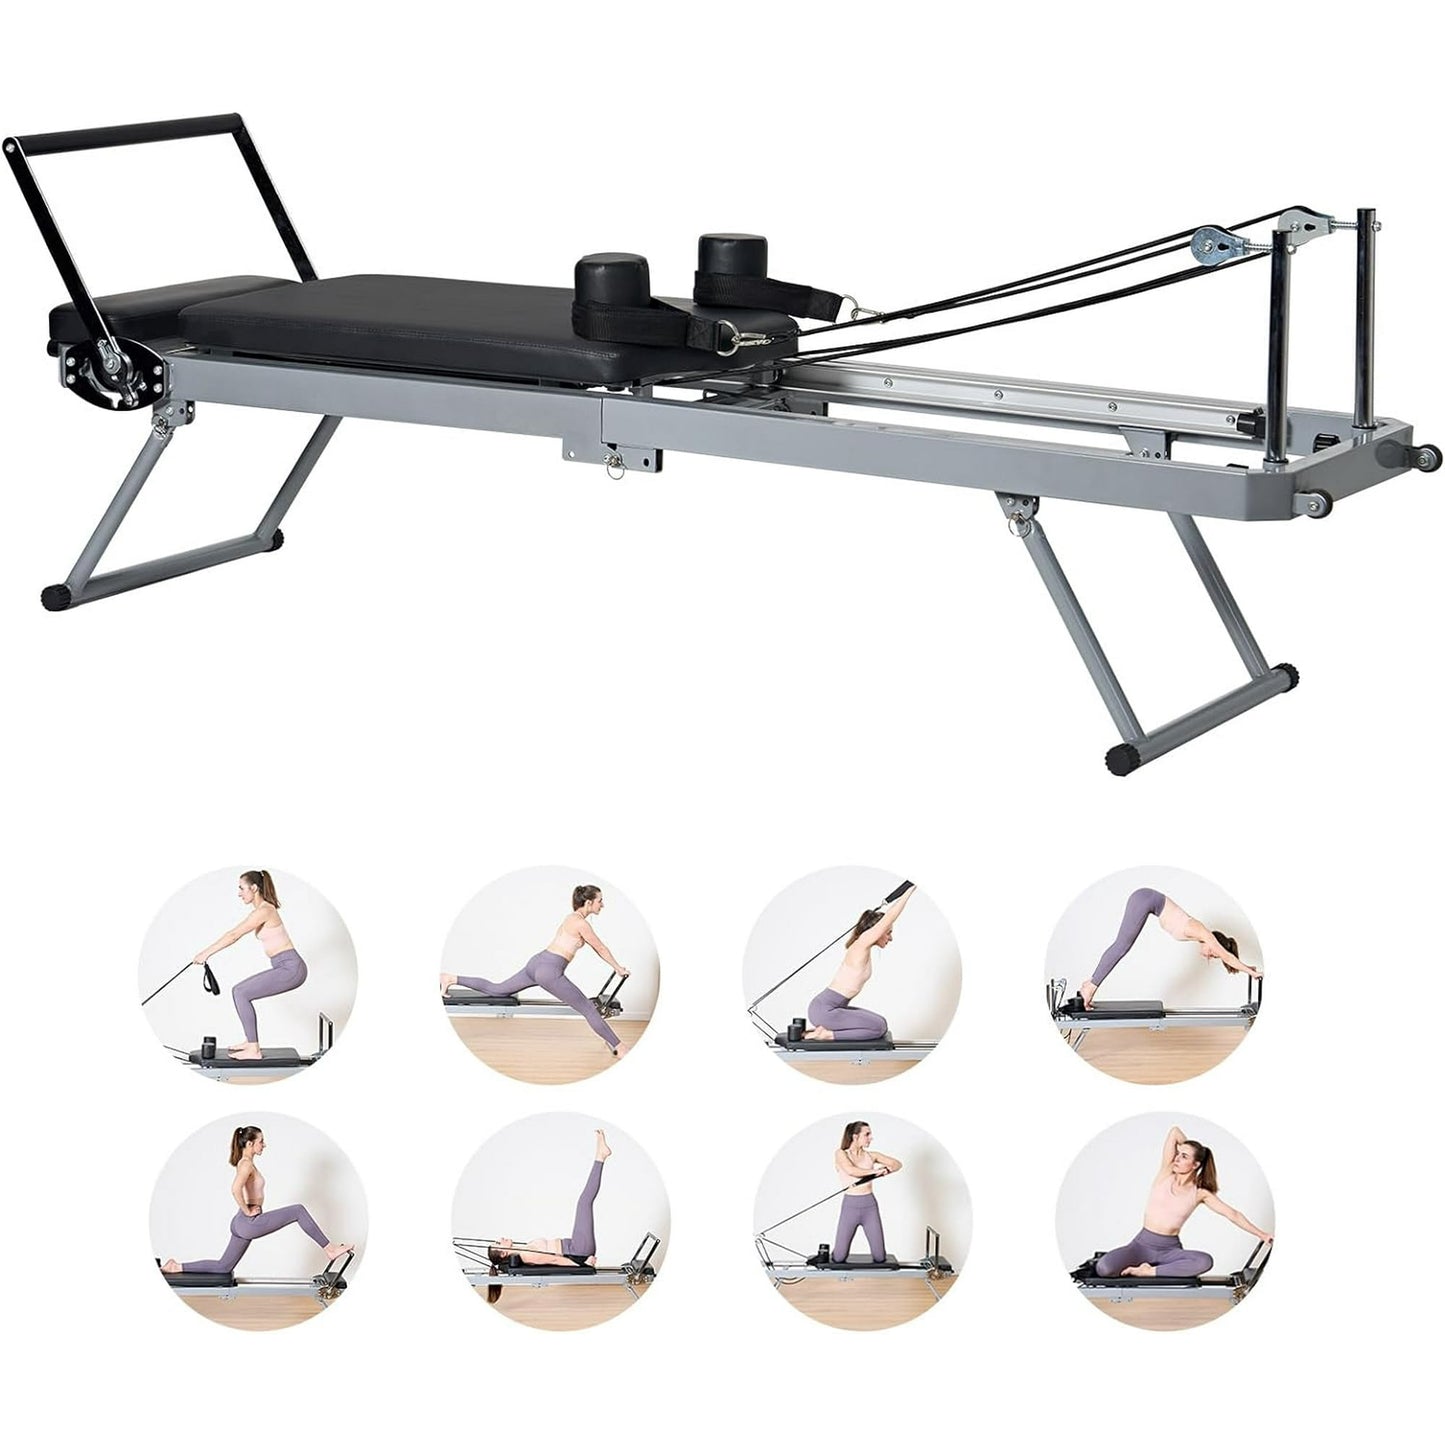 Soges Pilates Reformer Machine for Home Gym Workout, Foldable Pilates Equipment with High Strength Alloy Springs for Beginners, Up to 330lbs Weight Capacity